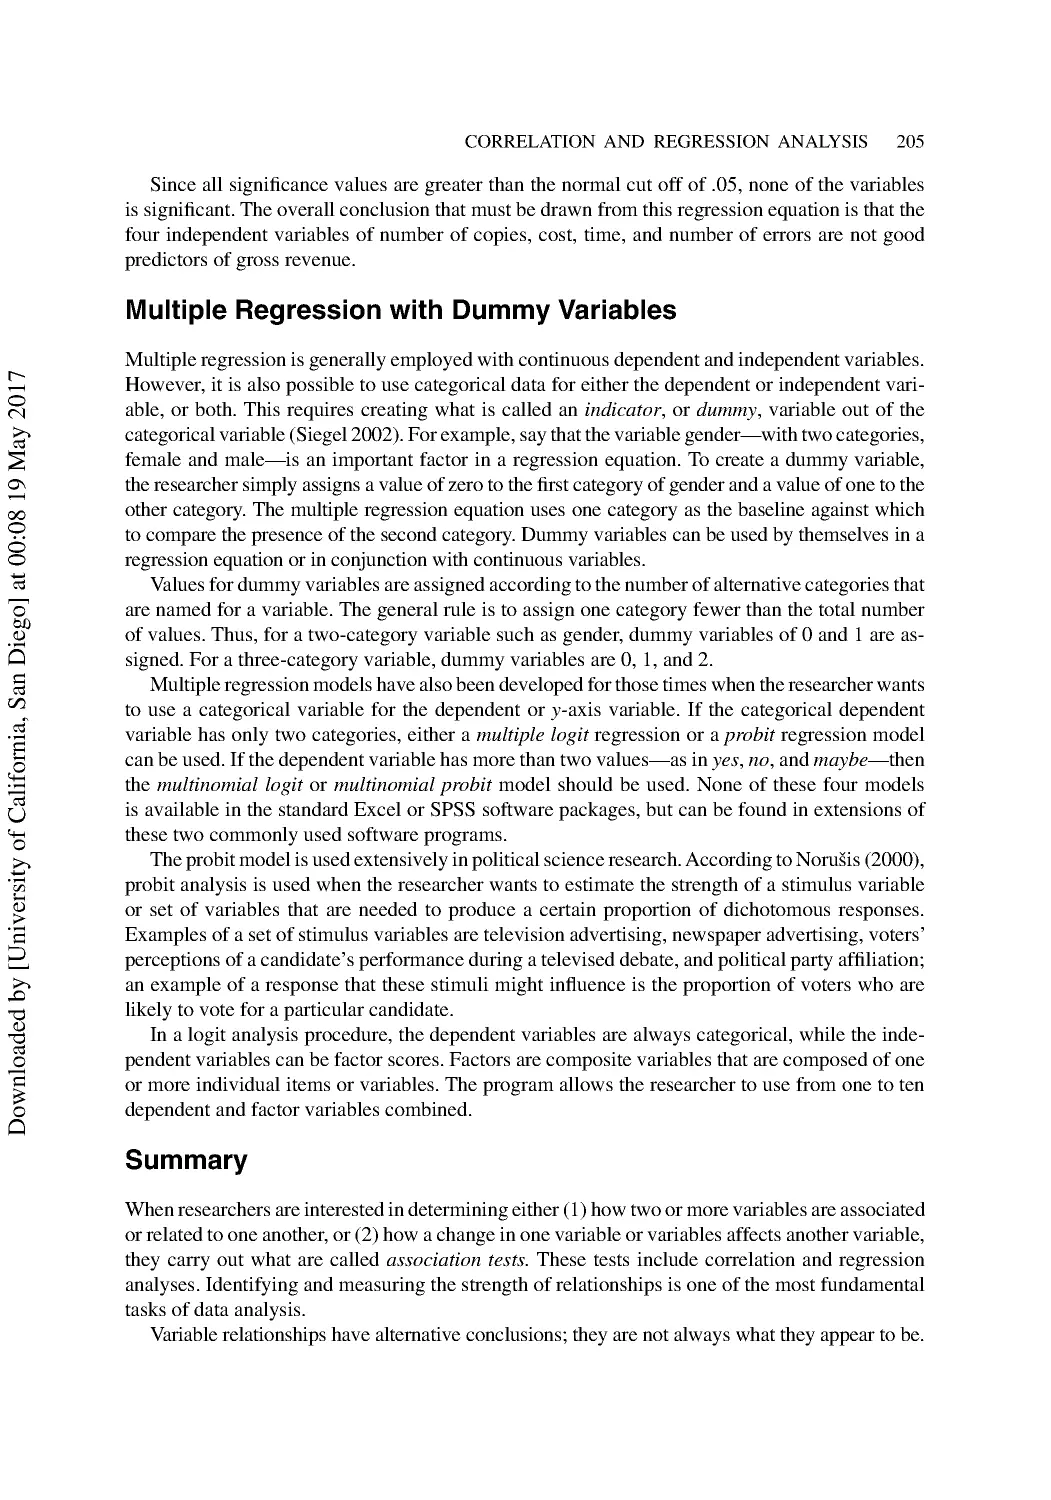 Multiple Regression with Dummy Variables
Summary